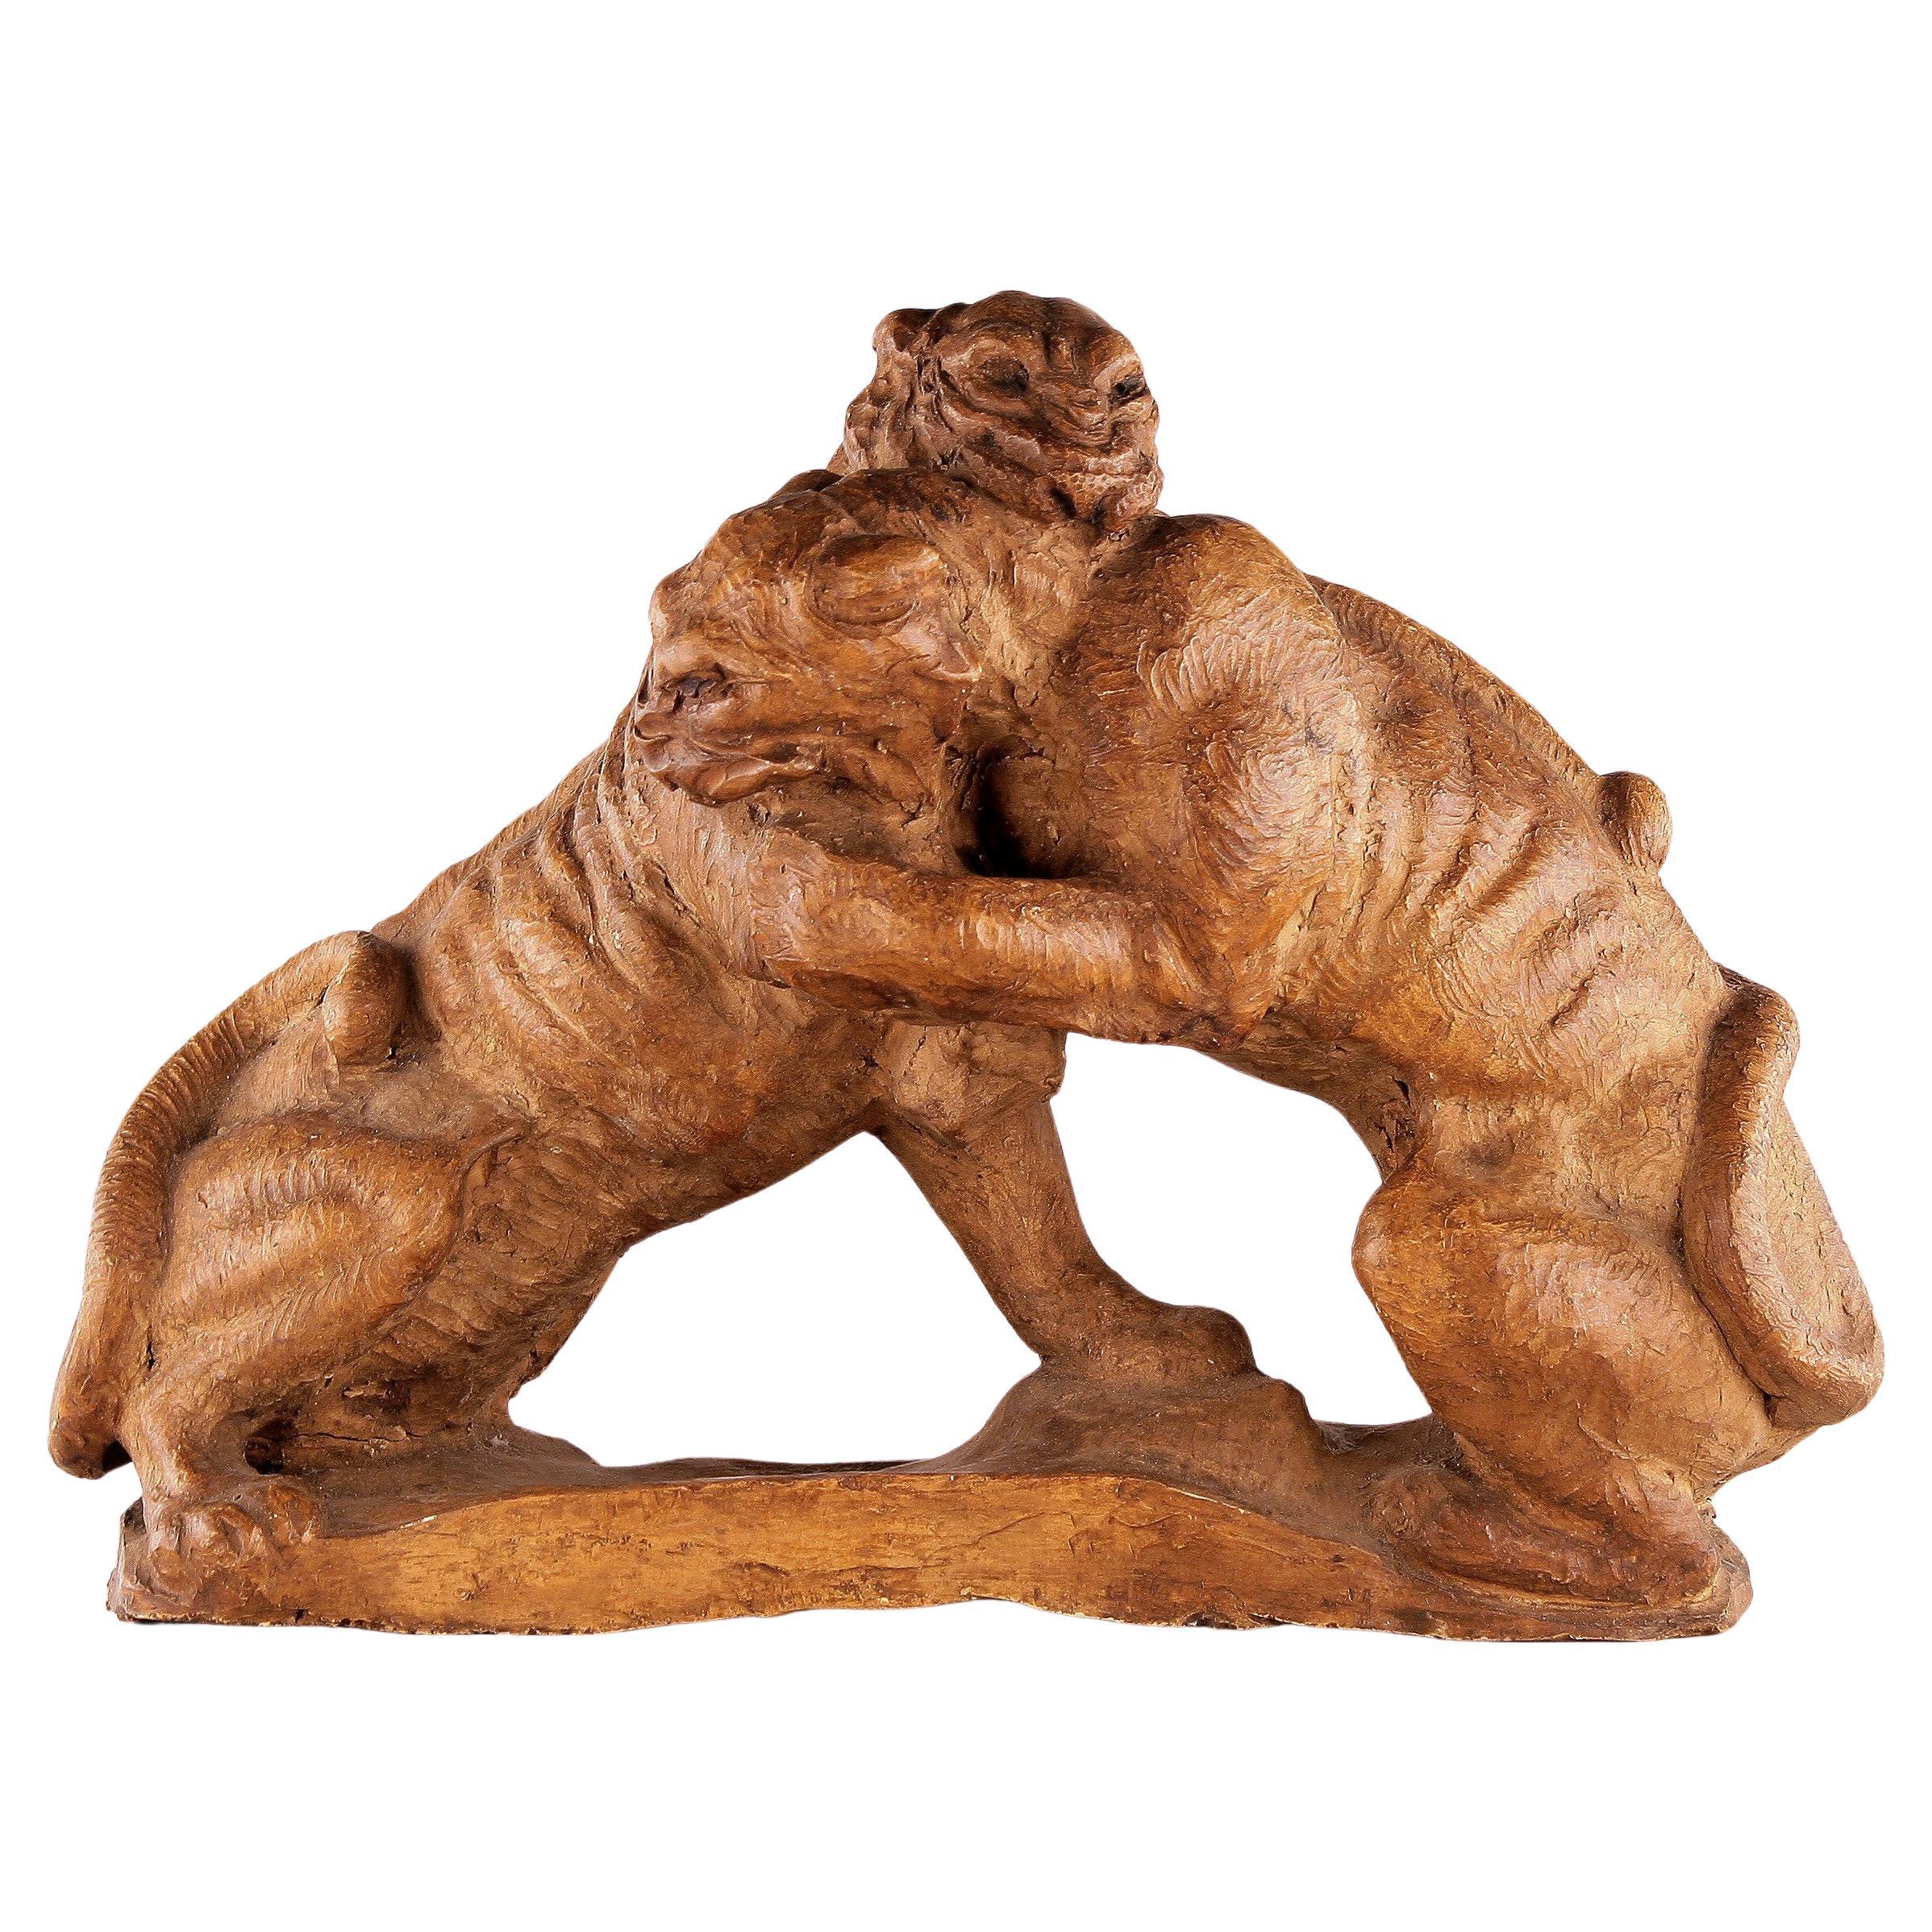 French Art Déco Terracota Sculpture of a Couple of Felines/Panthers Fighting